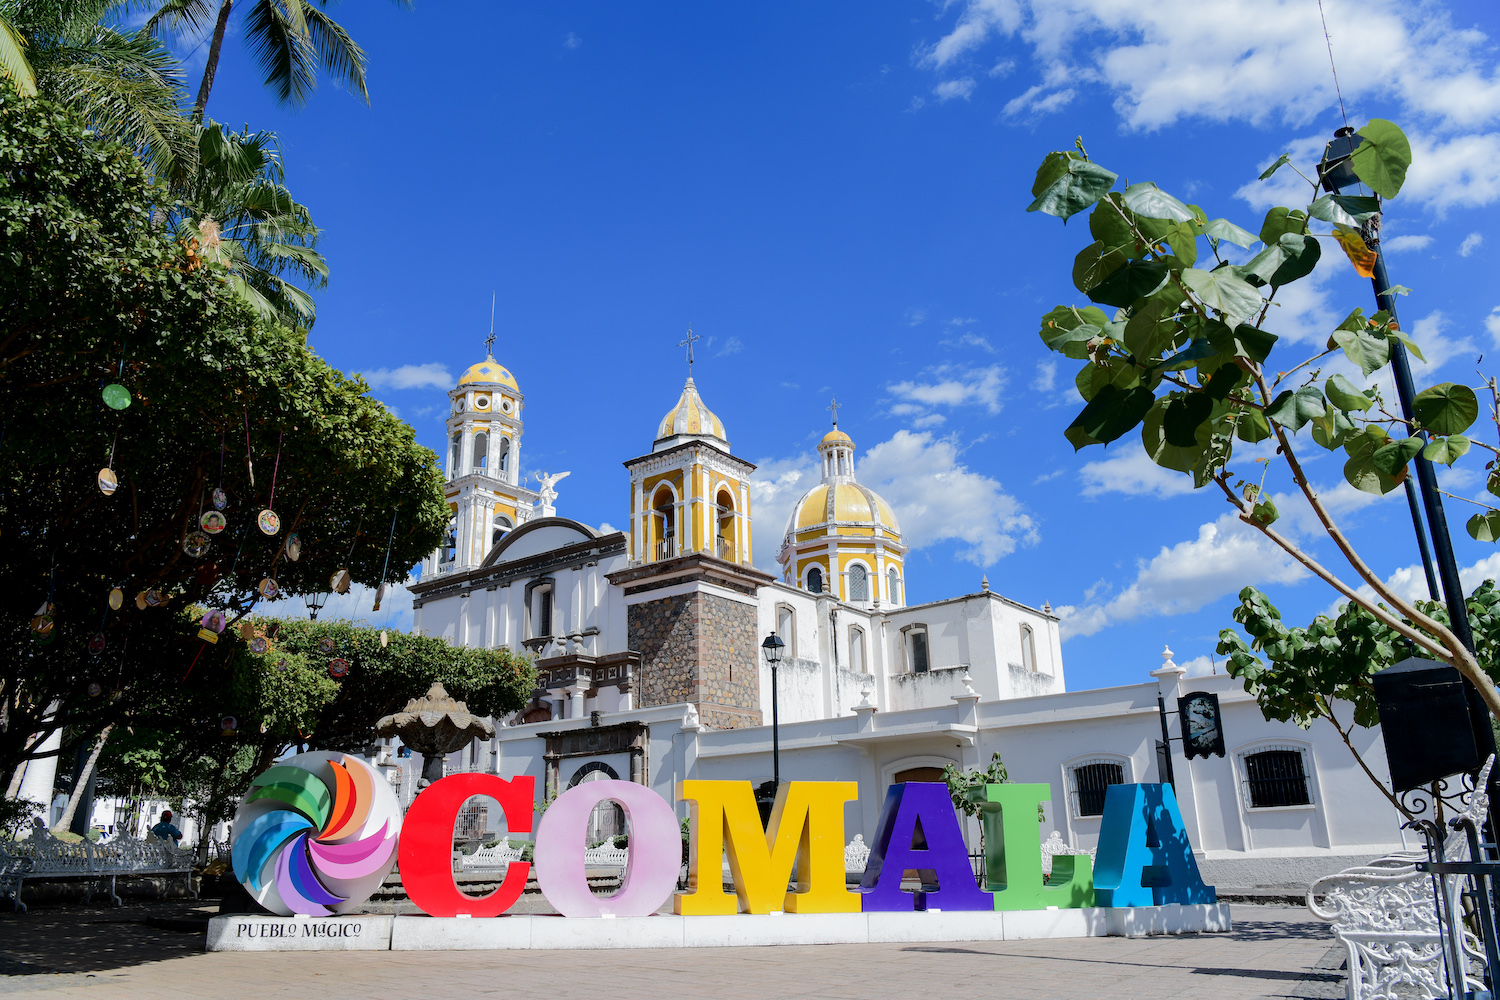 The town of Comala, Mexico featuring its iconic white-and-yellow chapel